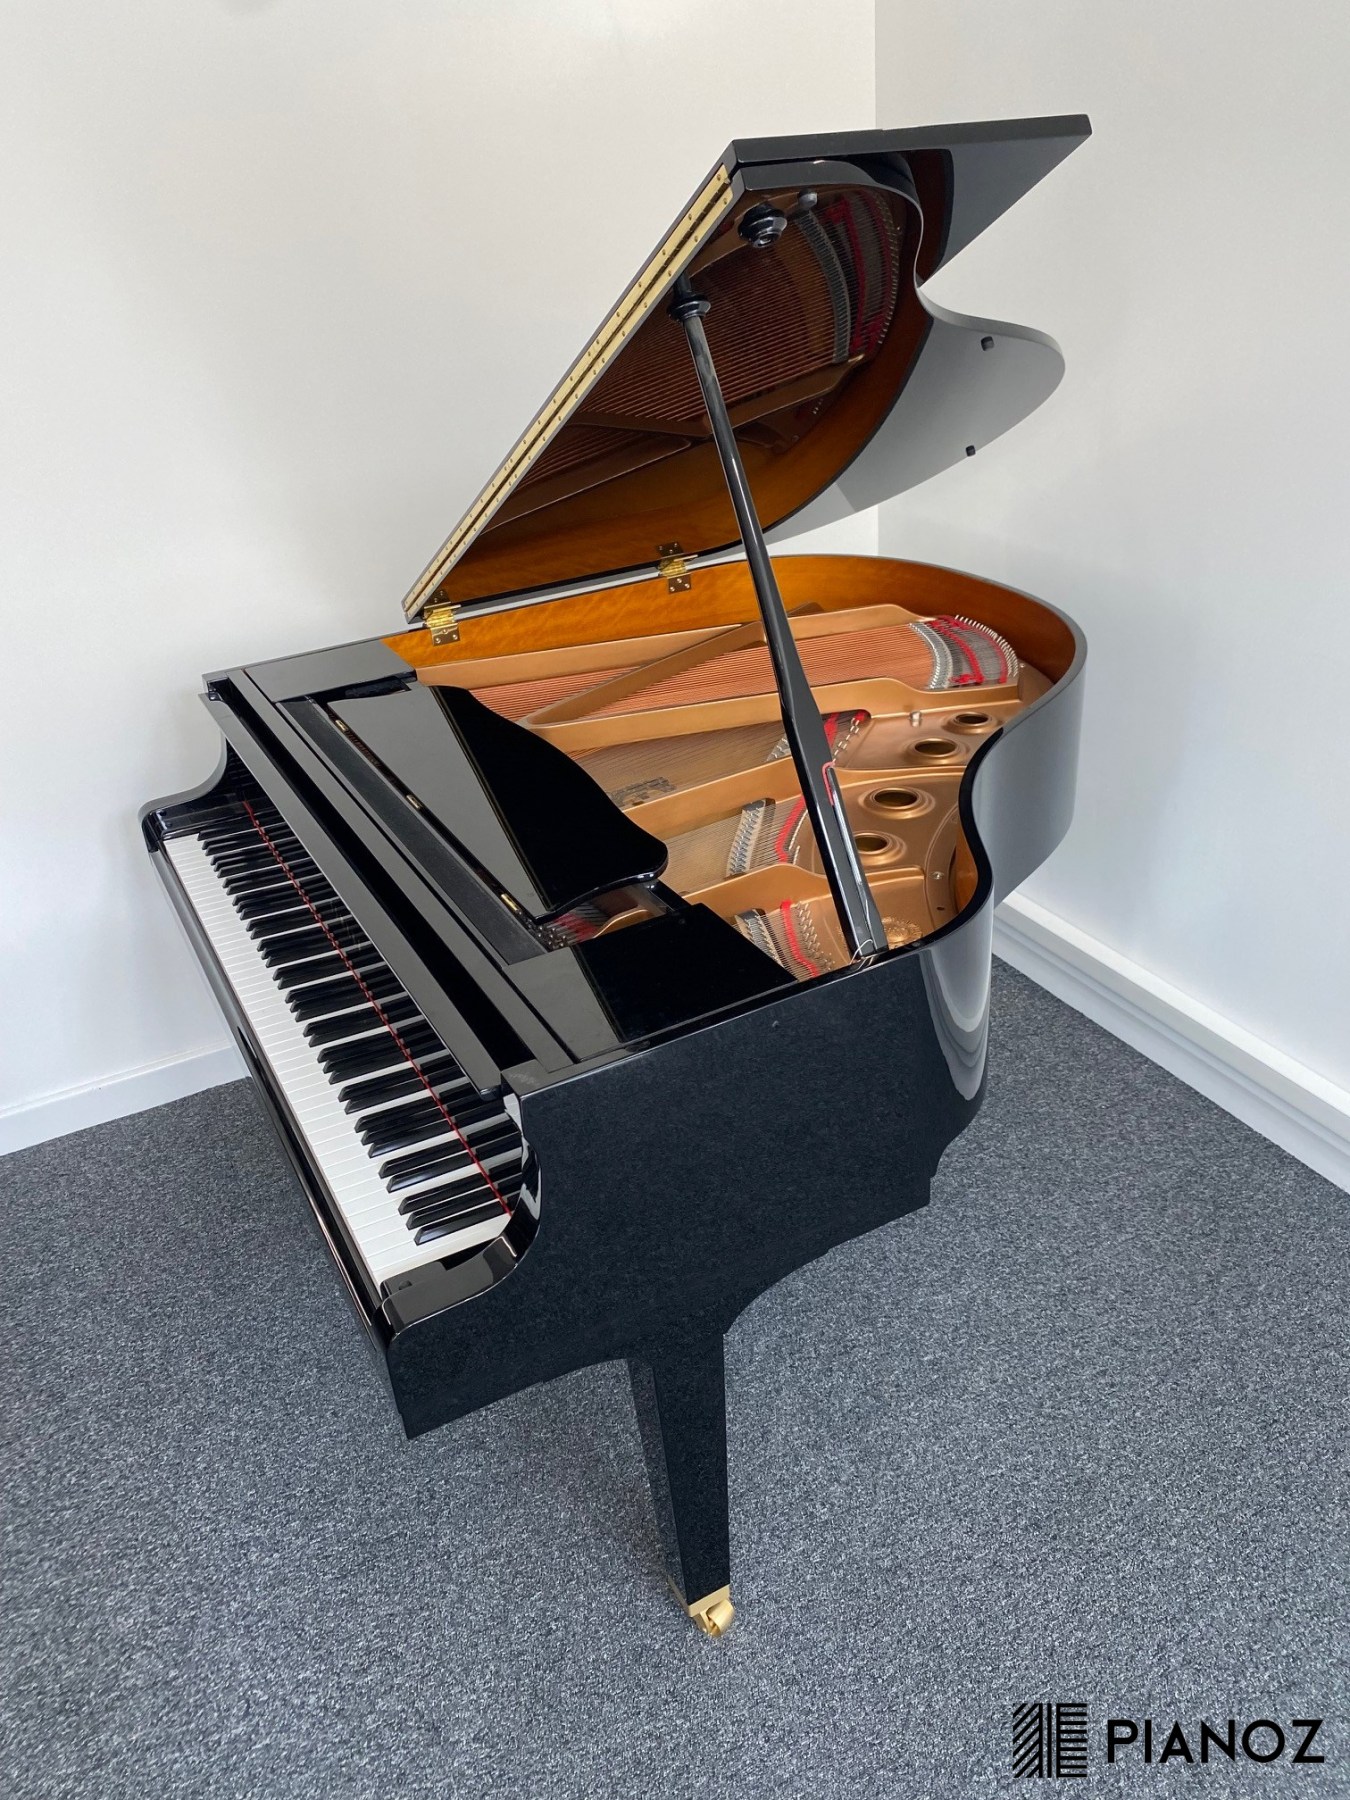 Yamaha GB1 Disklavier Self Playing Baby Grand Piano piano for sale in UK